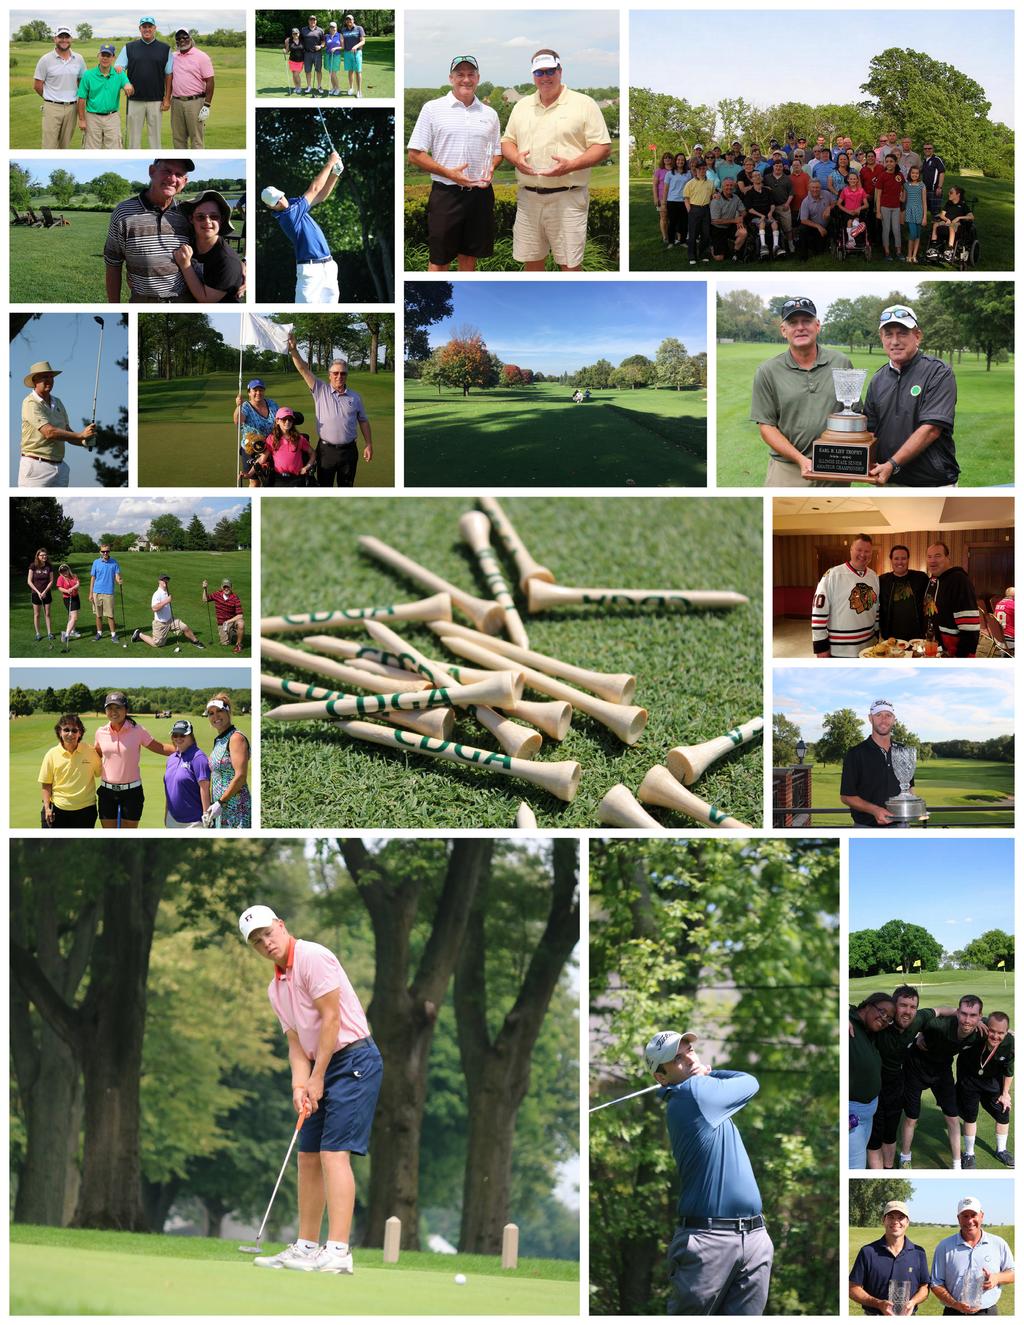 CONTACT All CDGA corporate partnerships are custom built to fit the needs and budgets of our